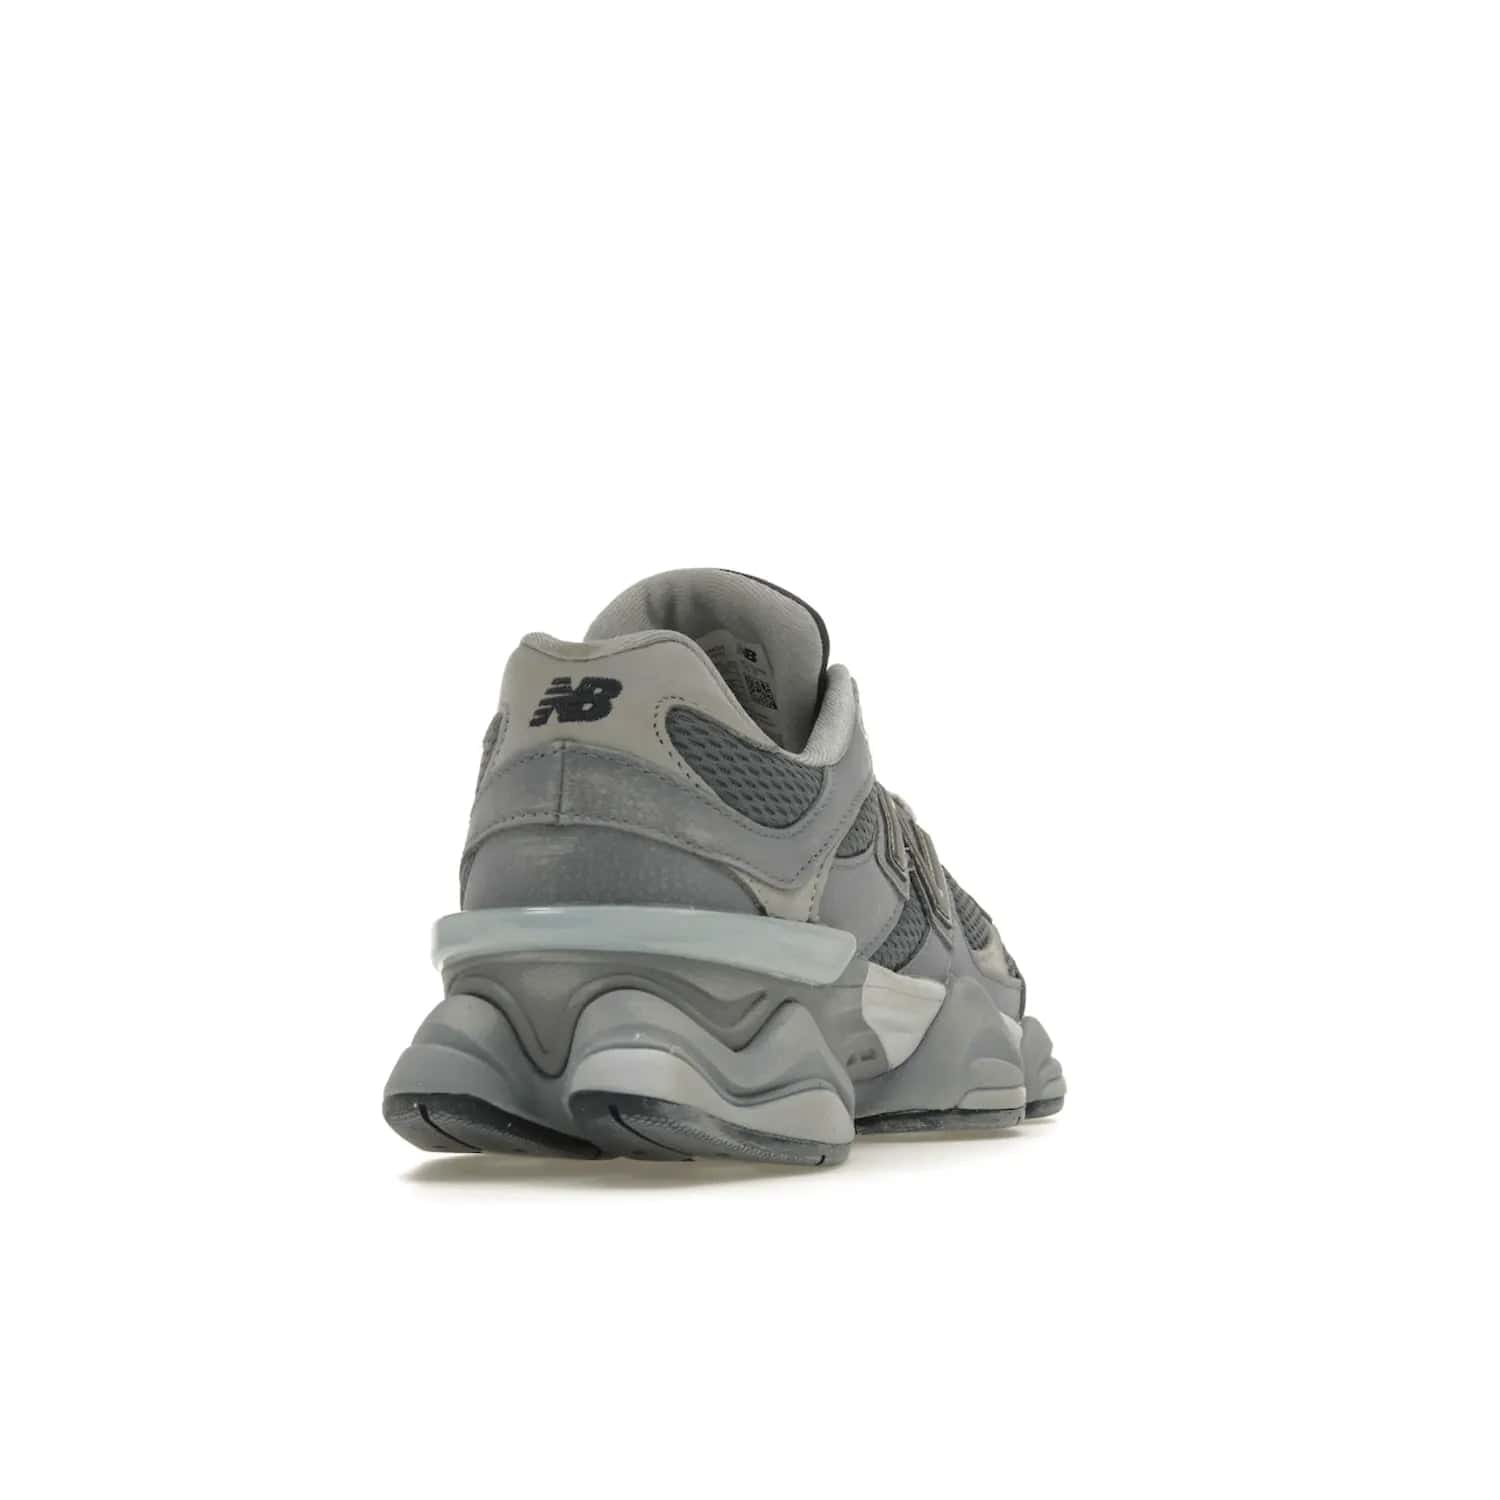 New Balance 9060 Grey Day (2023) - Image 30 - Only at www.BallersClubKickz.com - #
Sporty-meets-stylish in the New Balance 9060 Grey Day sneaker. Designed with Arctic Grey, Steel, and Silver Metallic, it offers an edgy but wearable look along with classic NB comfort and quality.